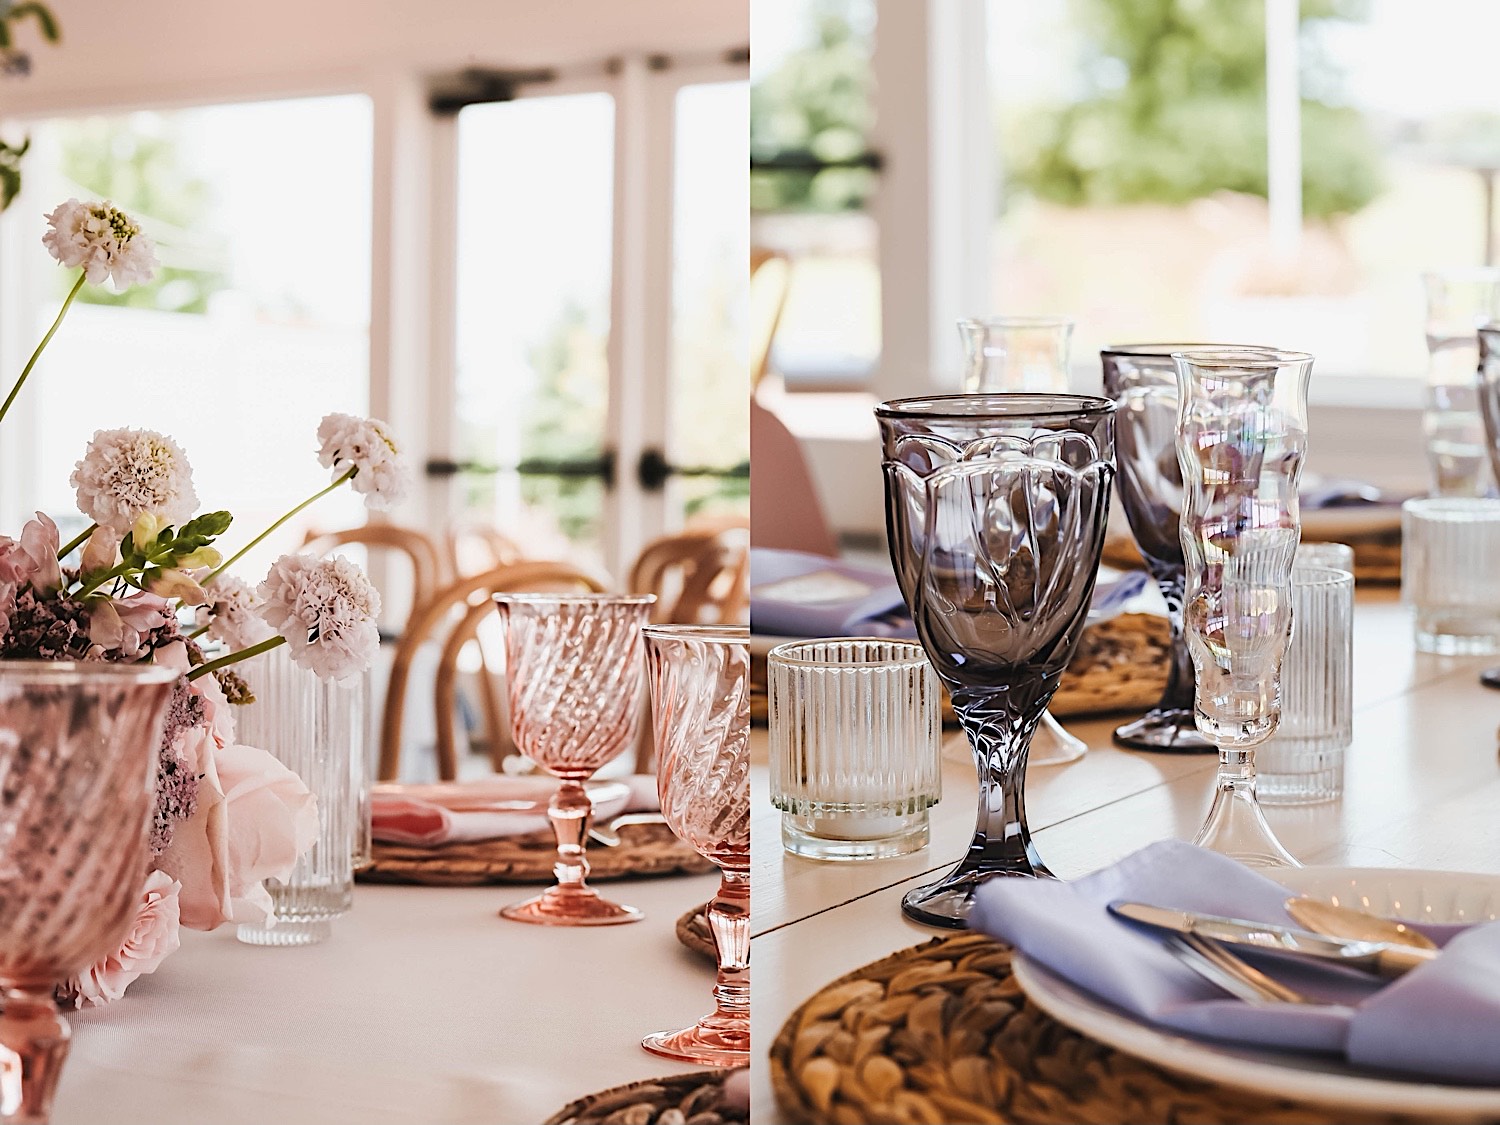 2 photos side by side of glassware set up on a table for a wedding reception, the left is pink glassware and the right is purple